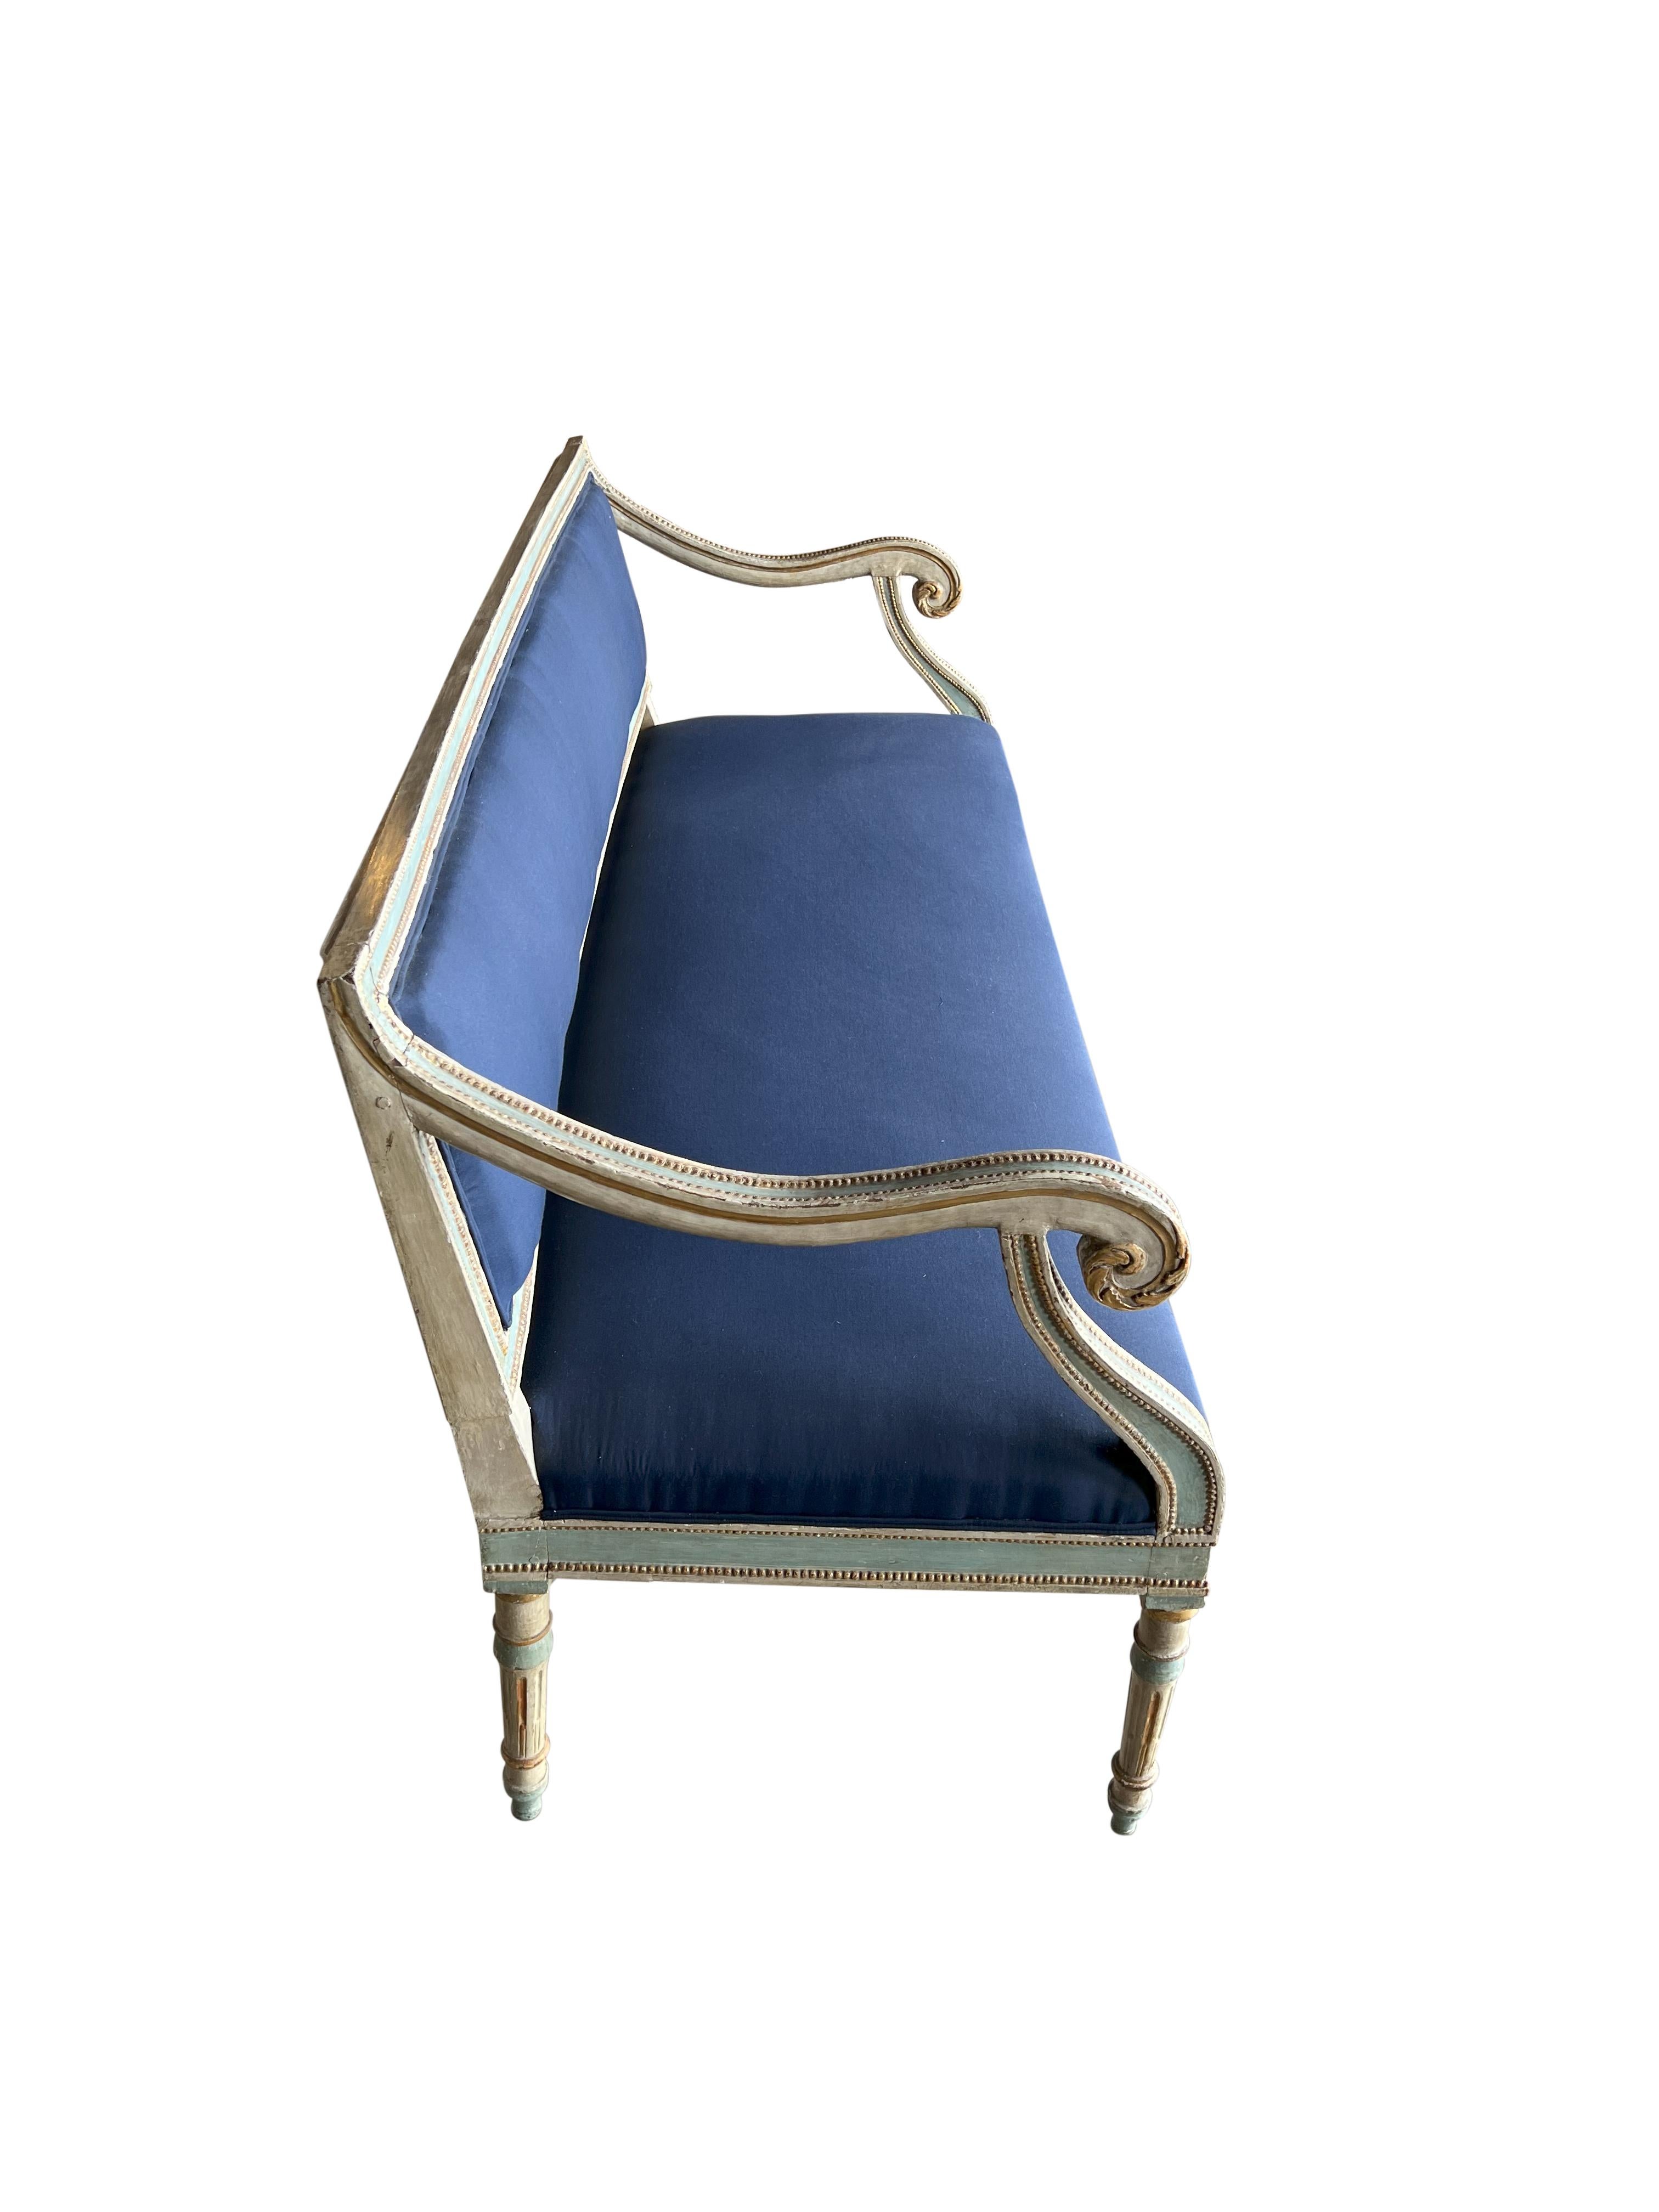 19th Century Italian Louis XVI Style Painted and Gold Gilt Bench Settee Ca 1820 For Sale 2